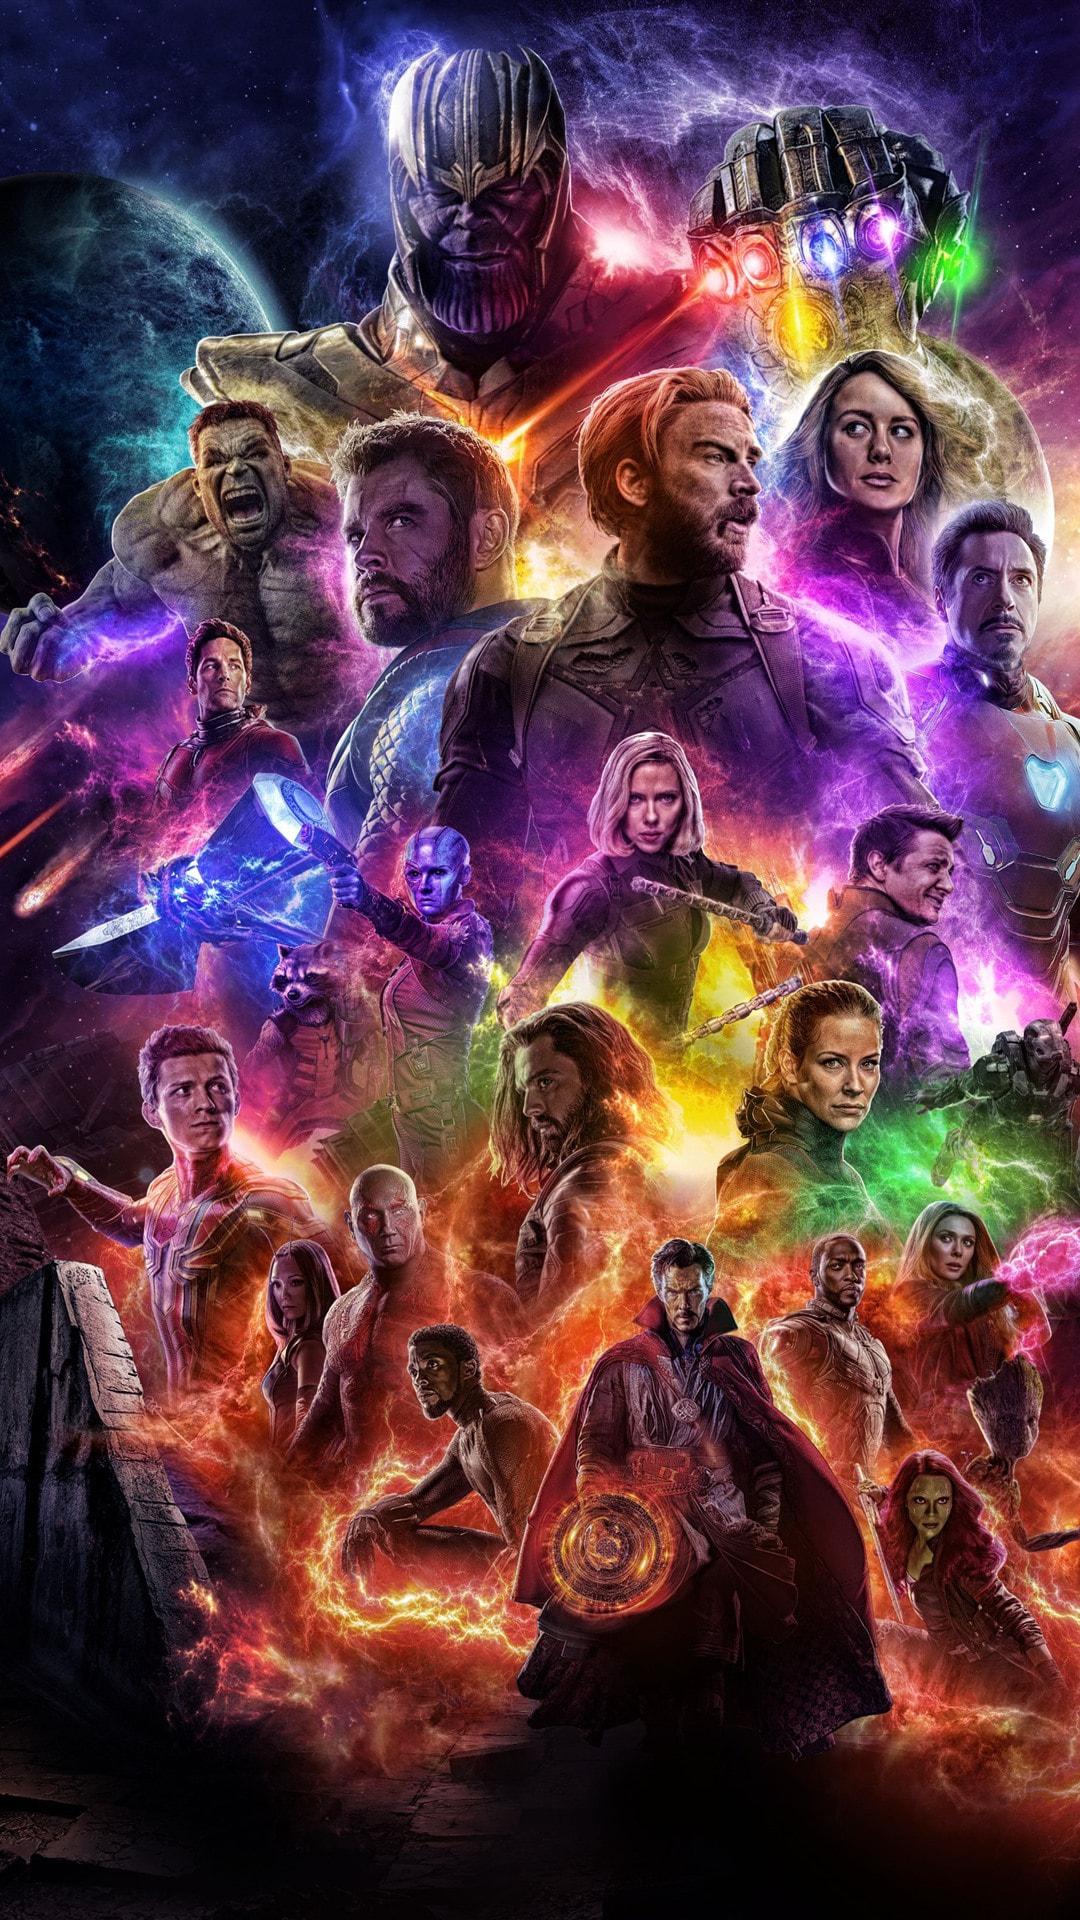 instal the last version for android Avengers: Endgame